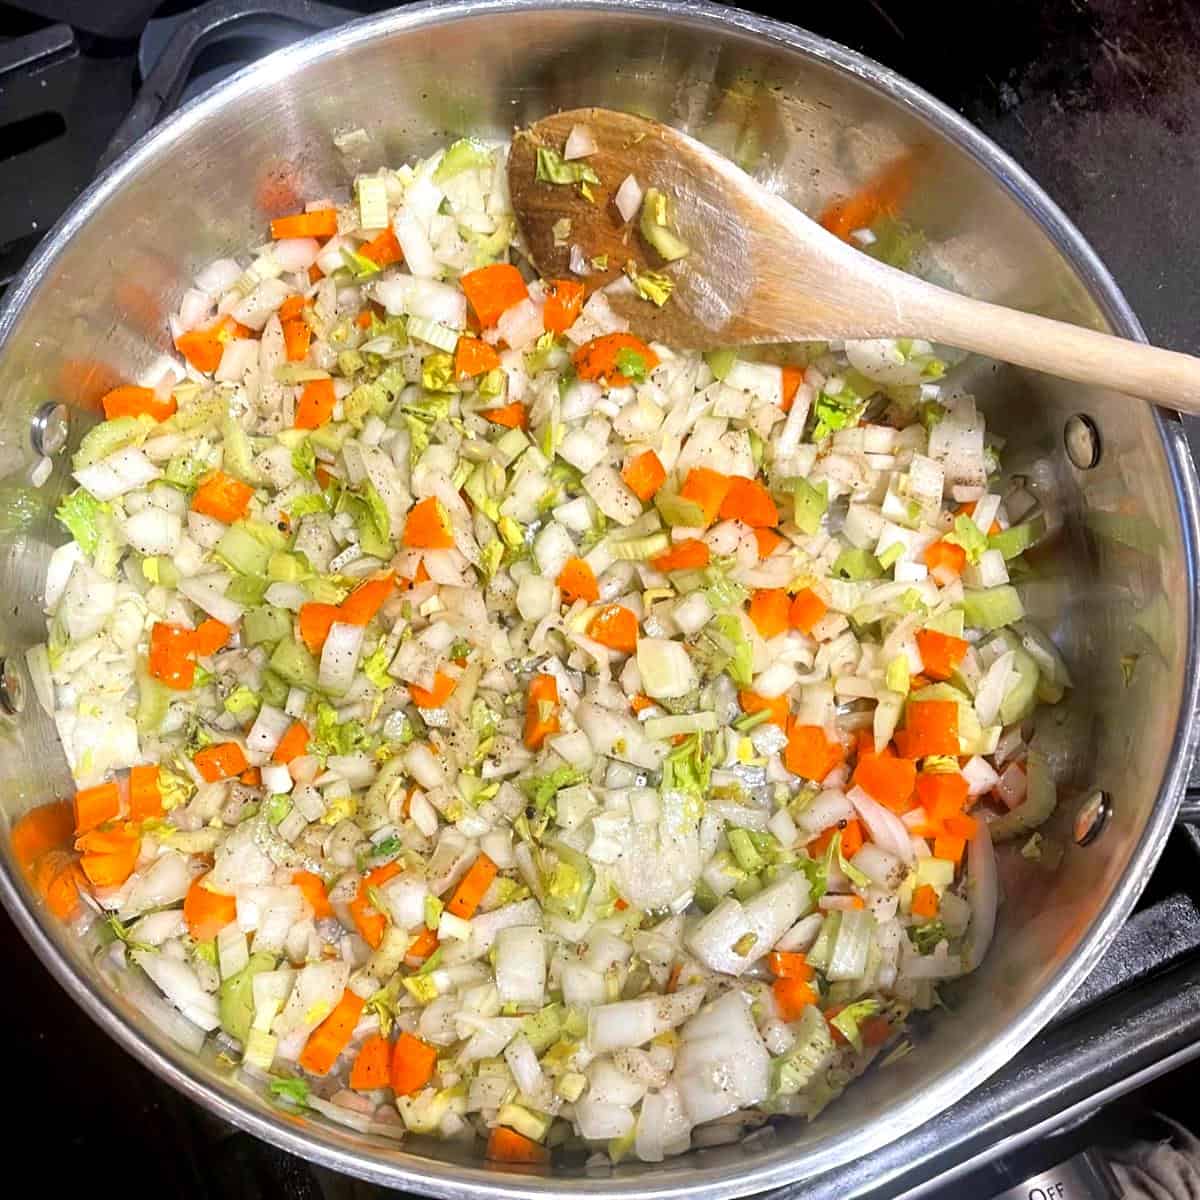 Carrots, celery, onions cooking in skillet.